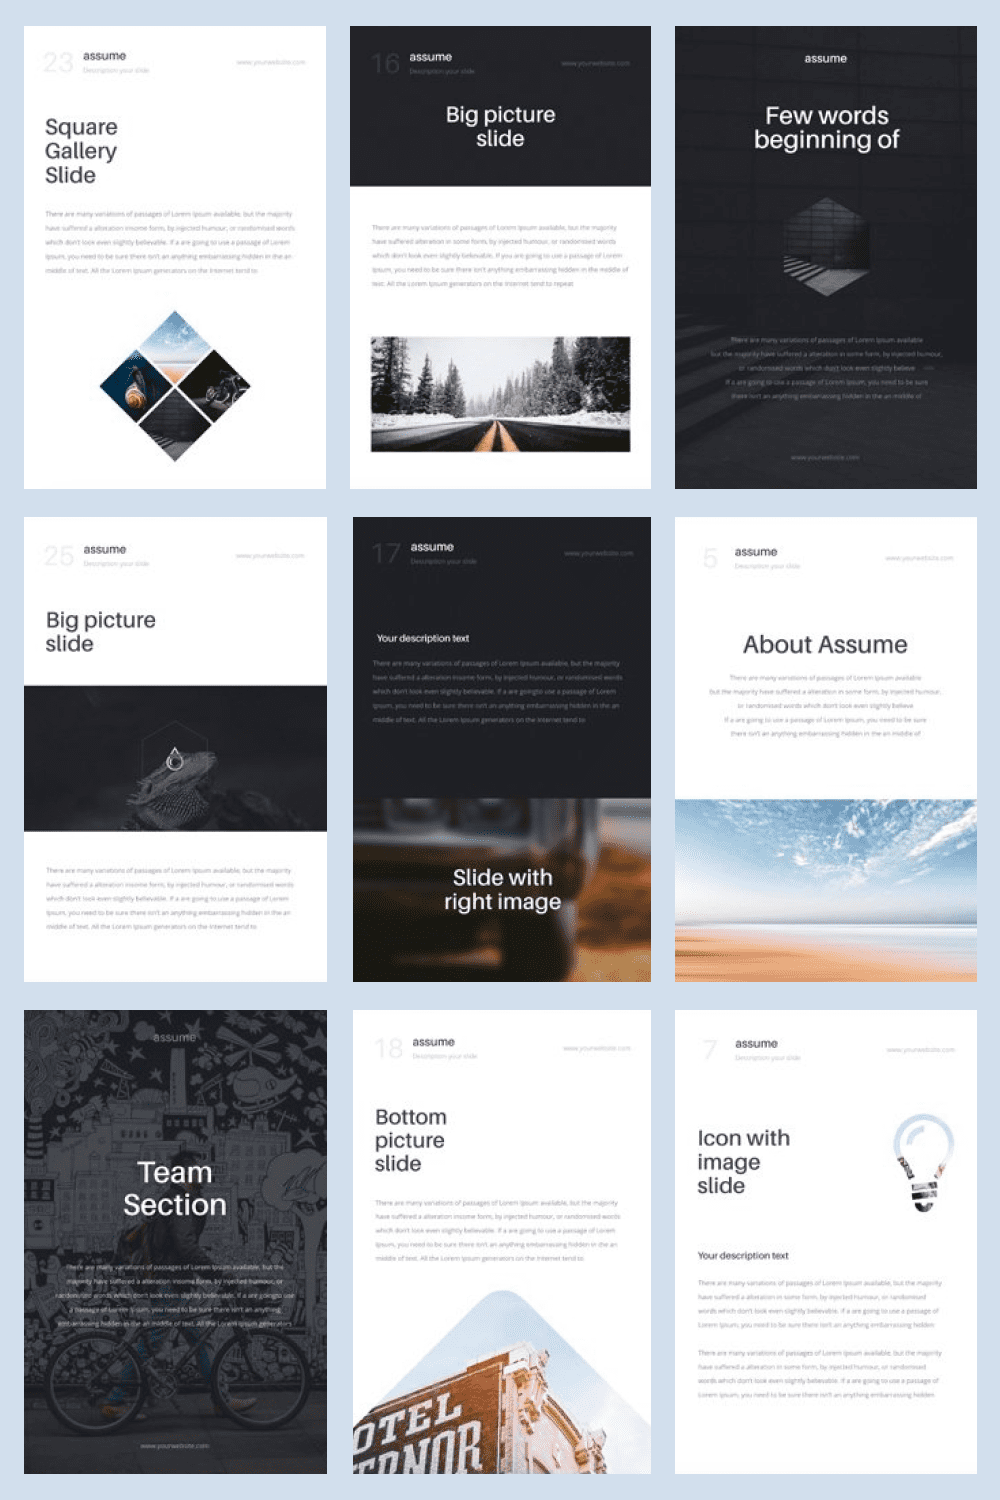 The template has a cool tint, which makes it as close to business themes as possible.